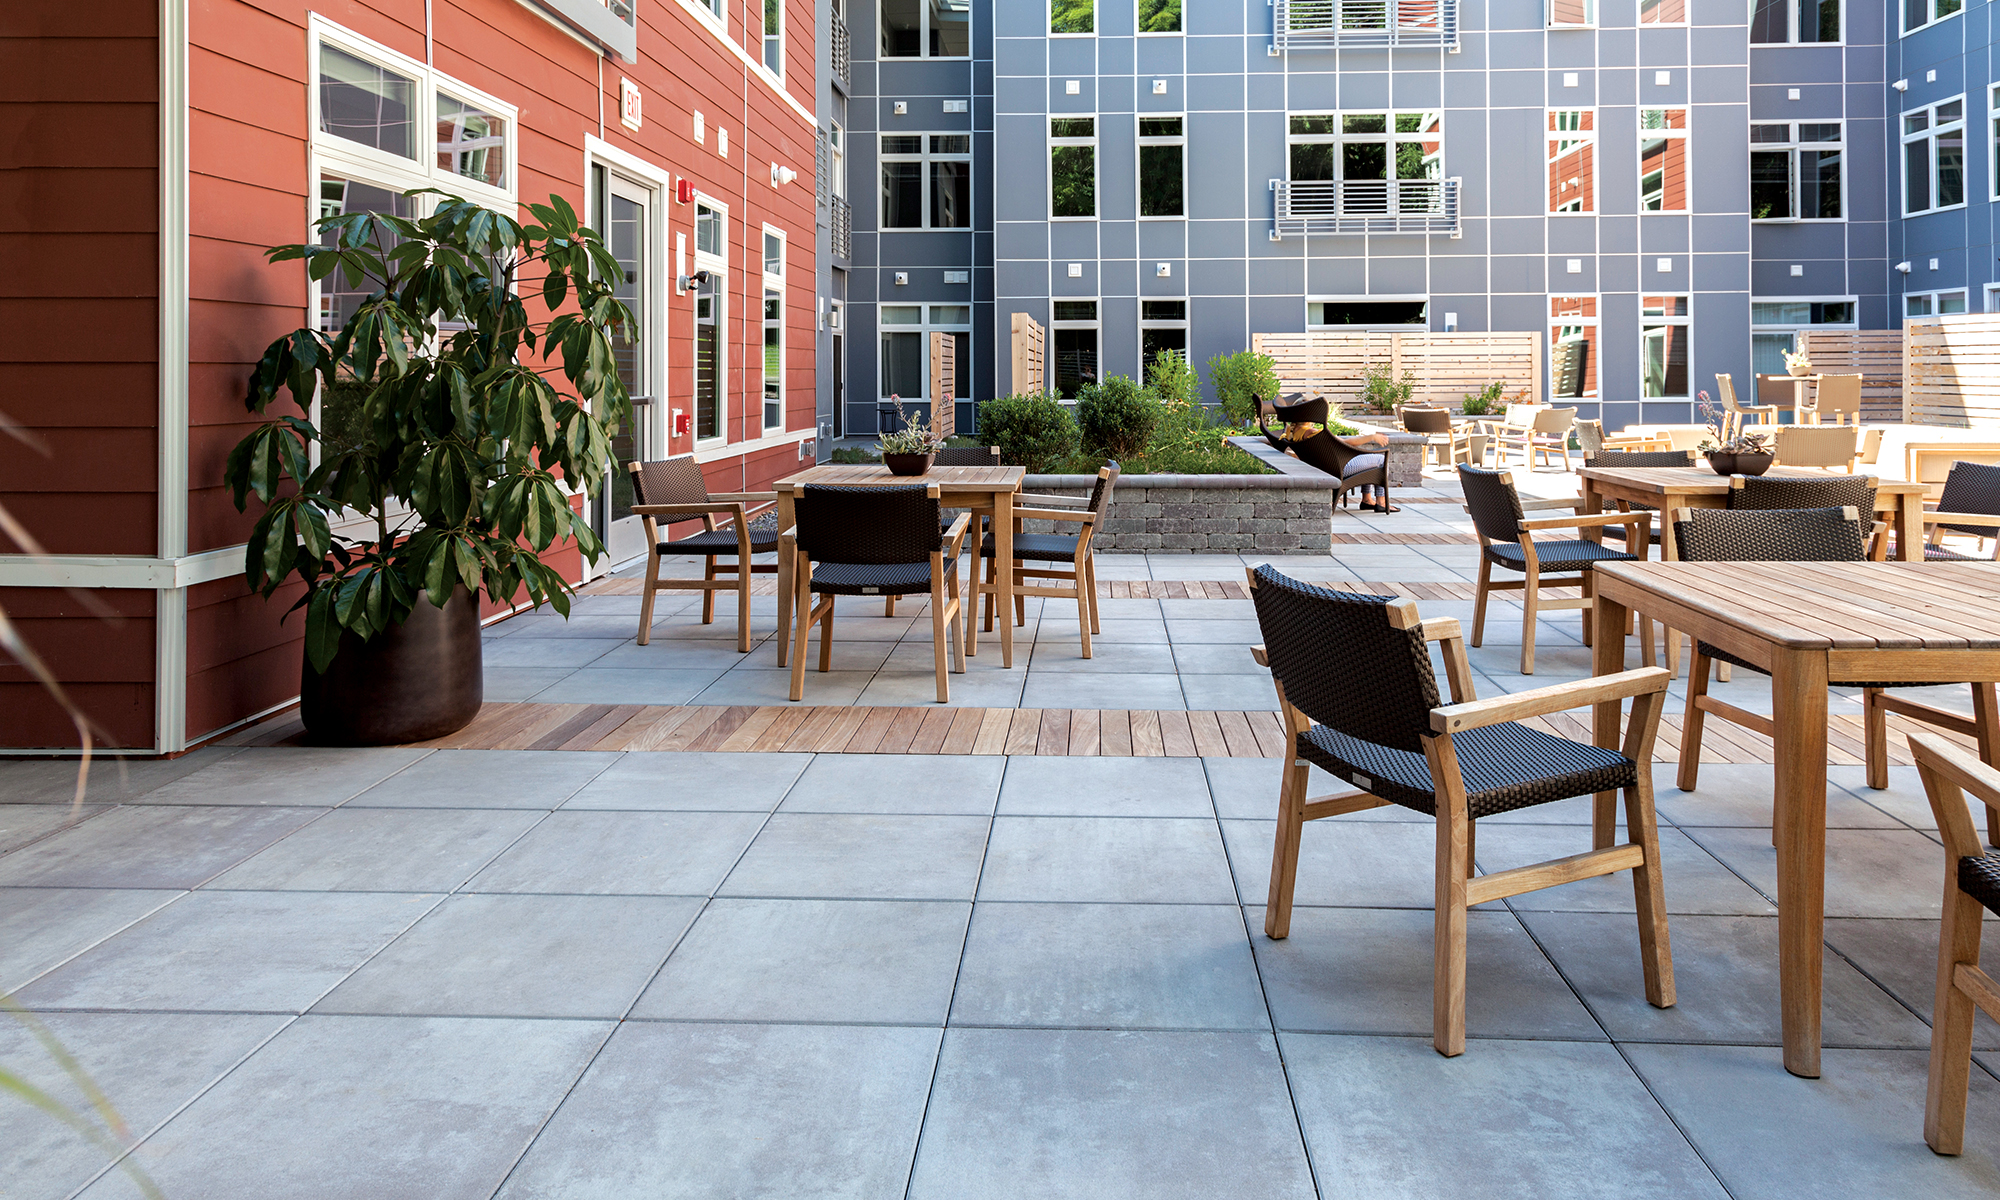 At 99 Tremont, a multifamily development in Brighton, Massachusetts, concrete slabs interspersed with wooden plank accents create an aesthetic surface on an elevated courtyard.